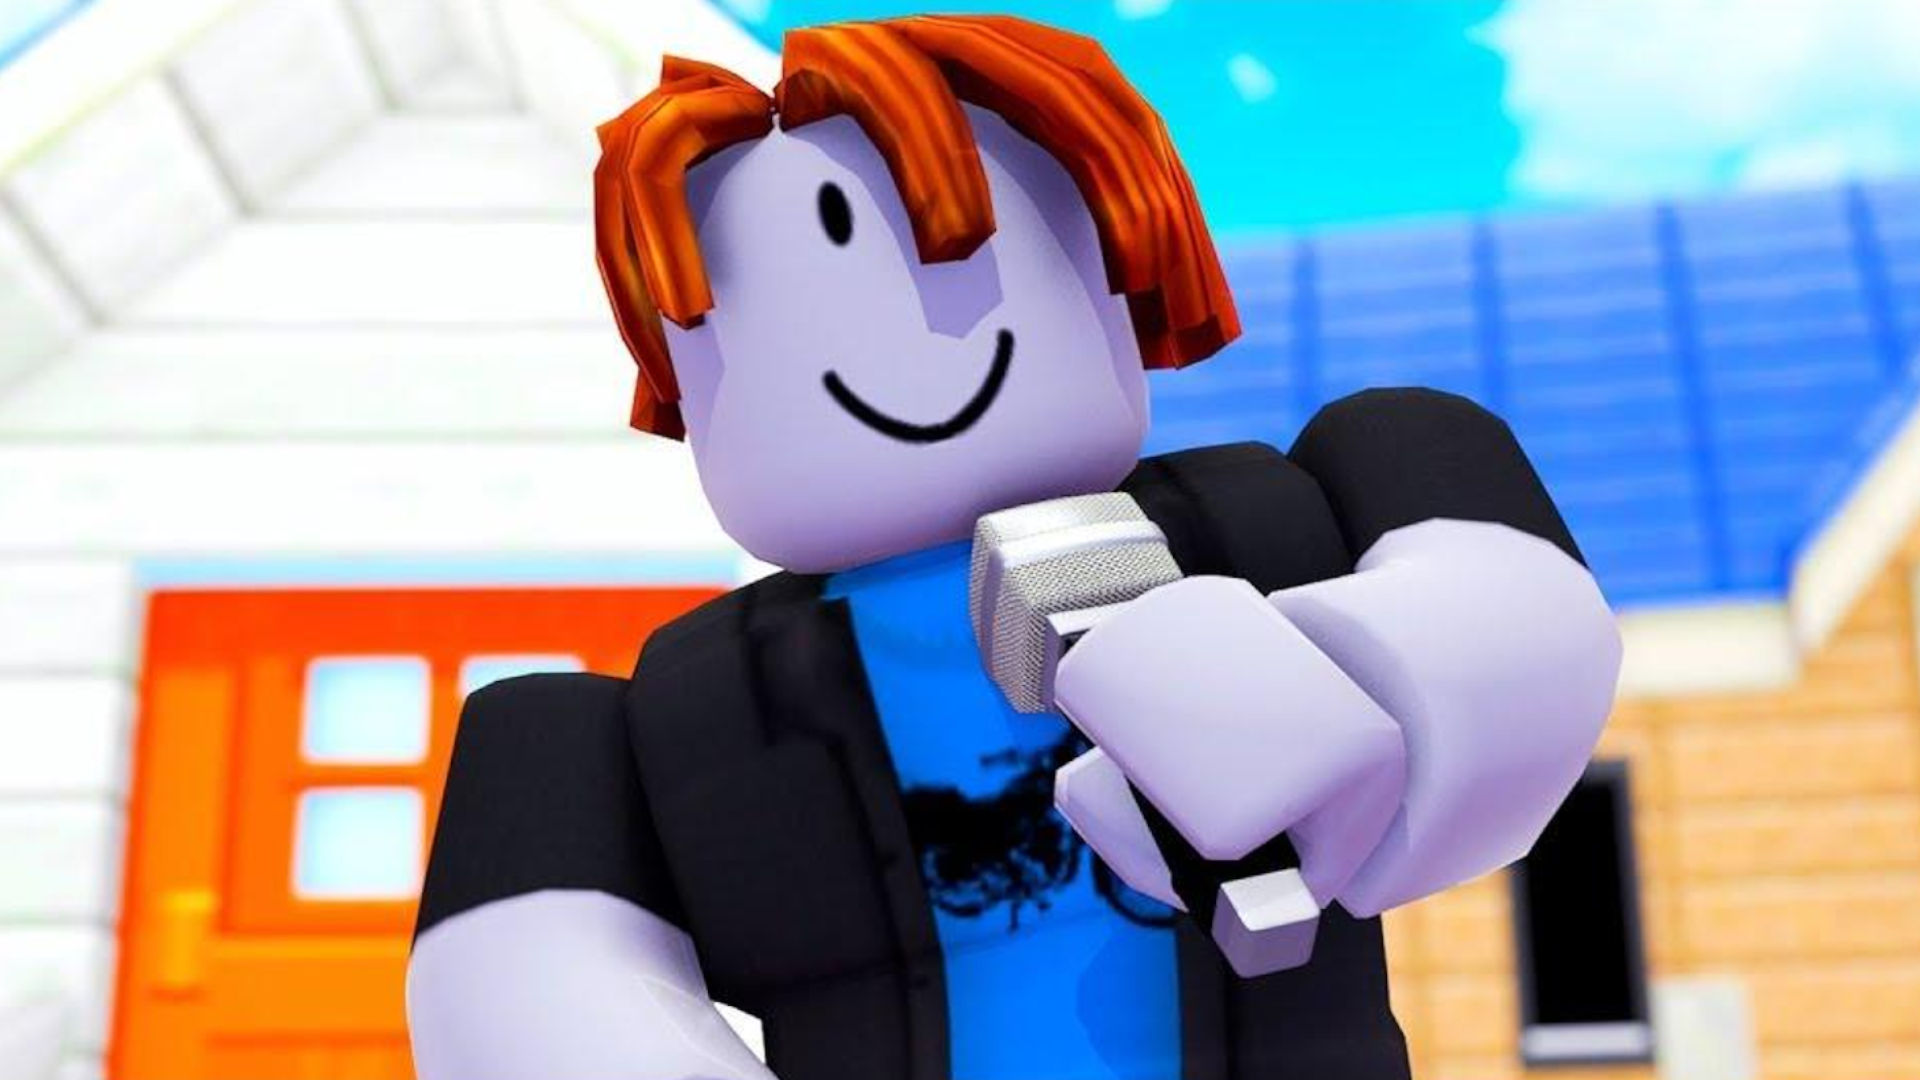 The Bacon Hair 3 The Guests  A Roblox Action Movie  YouTube